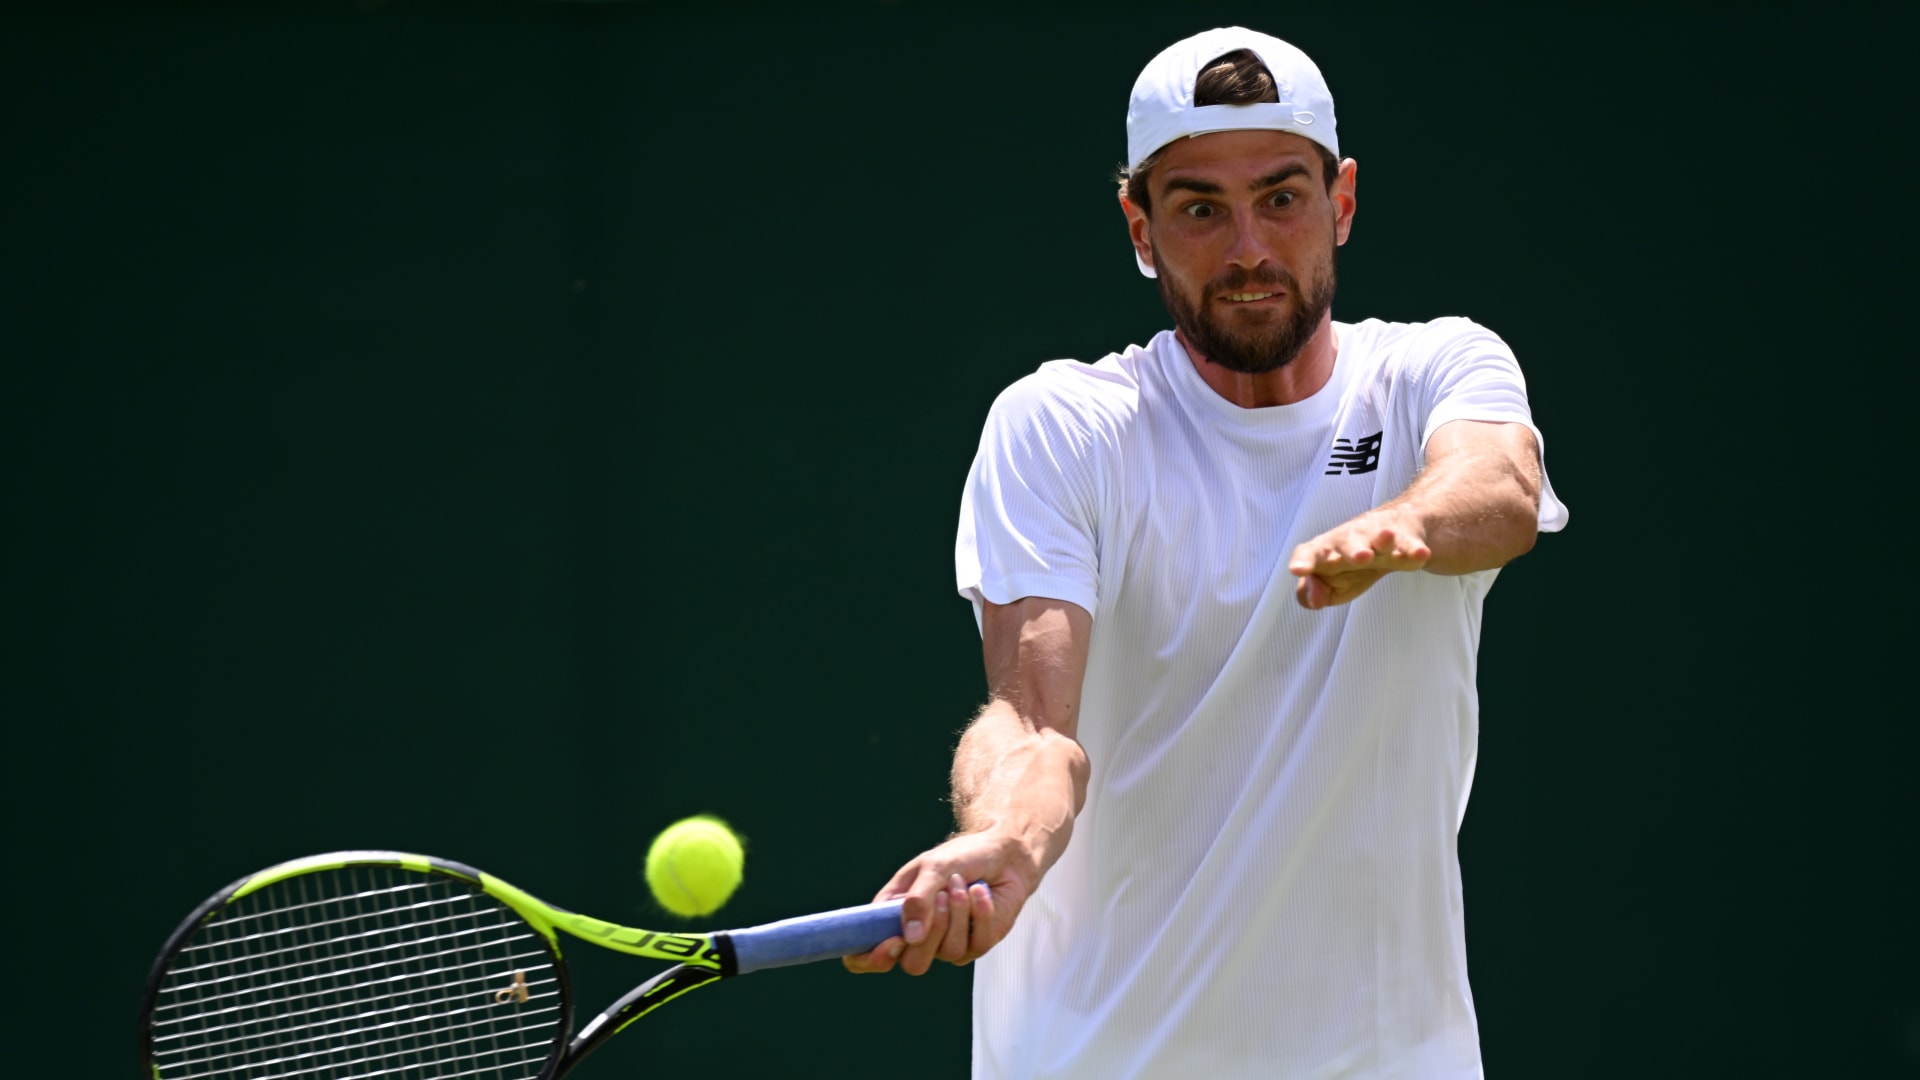 Maxime Cressy edges Alexander Bublik on grass for first ATP title in Newport